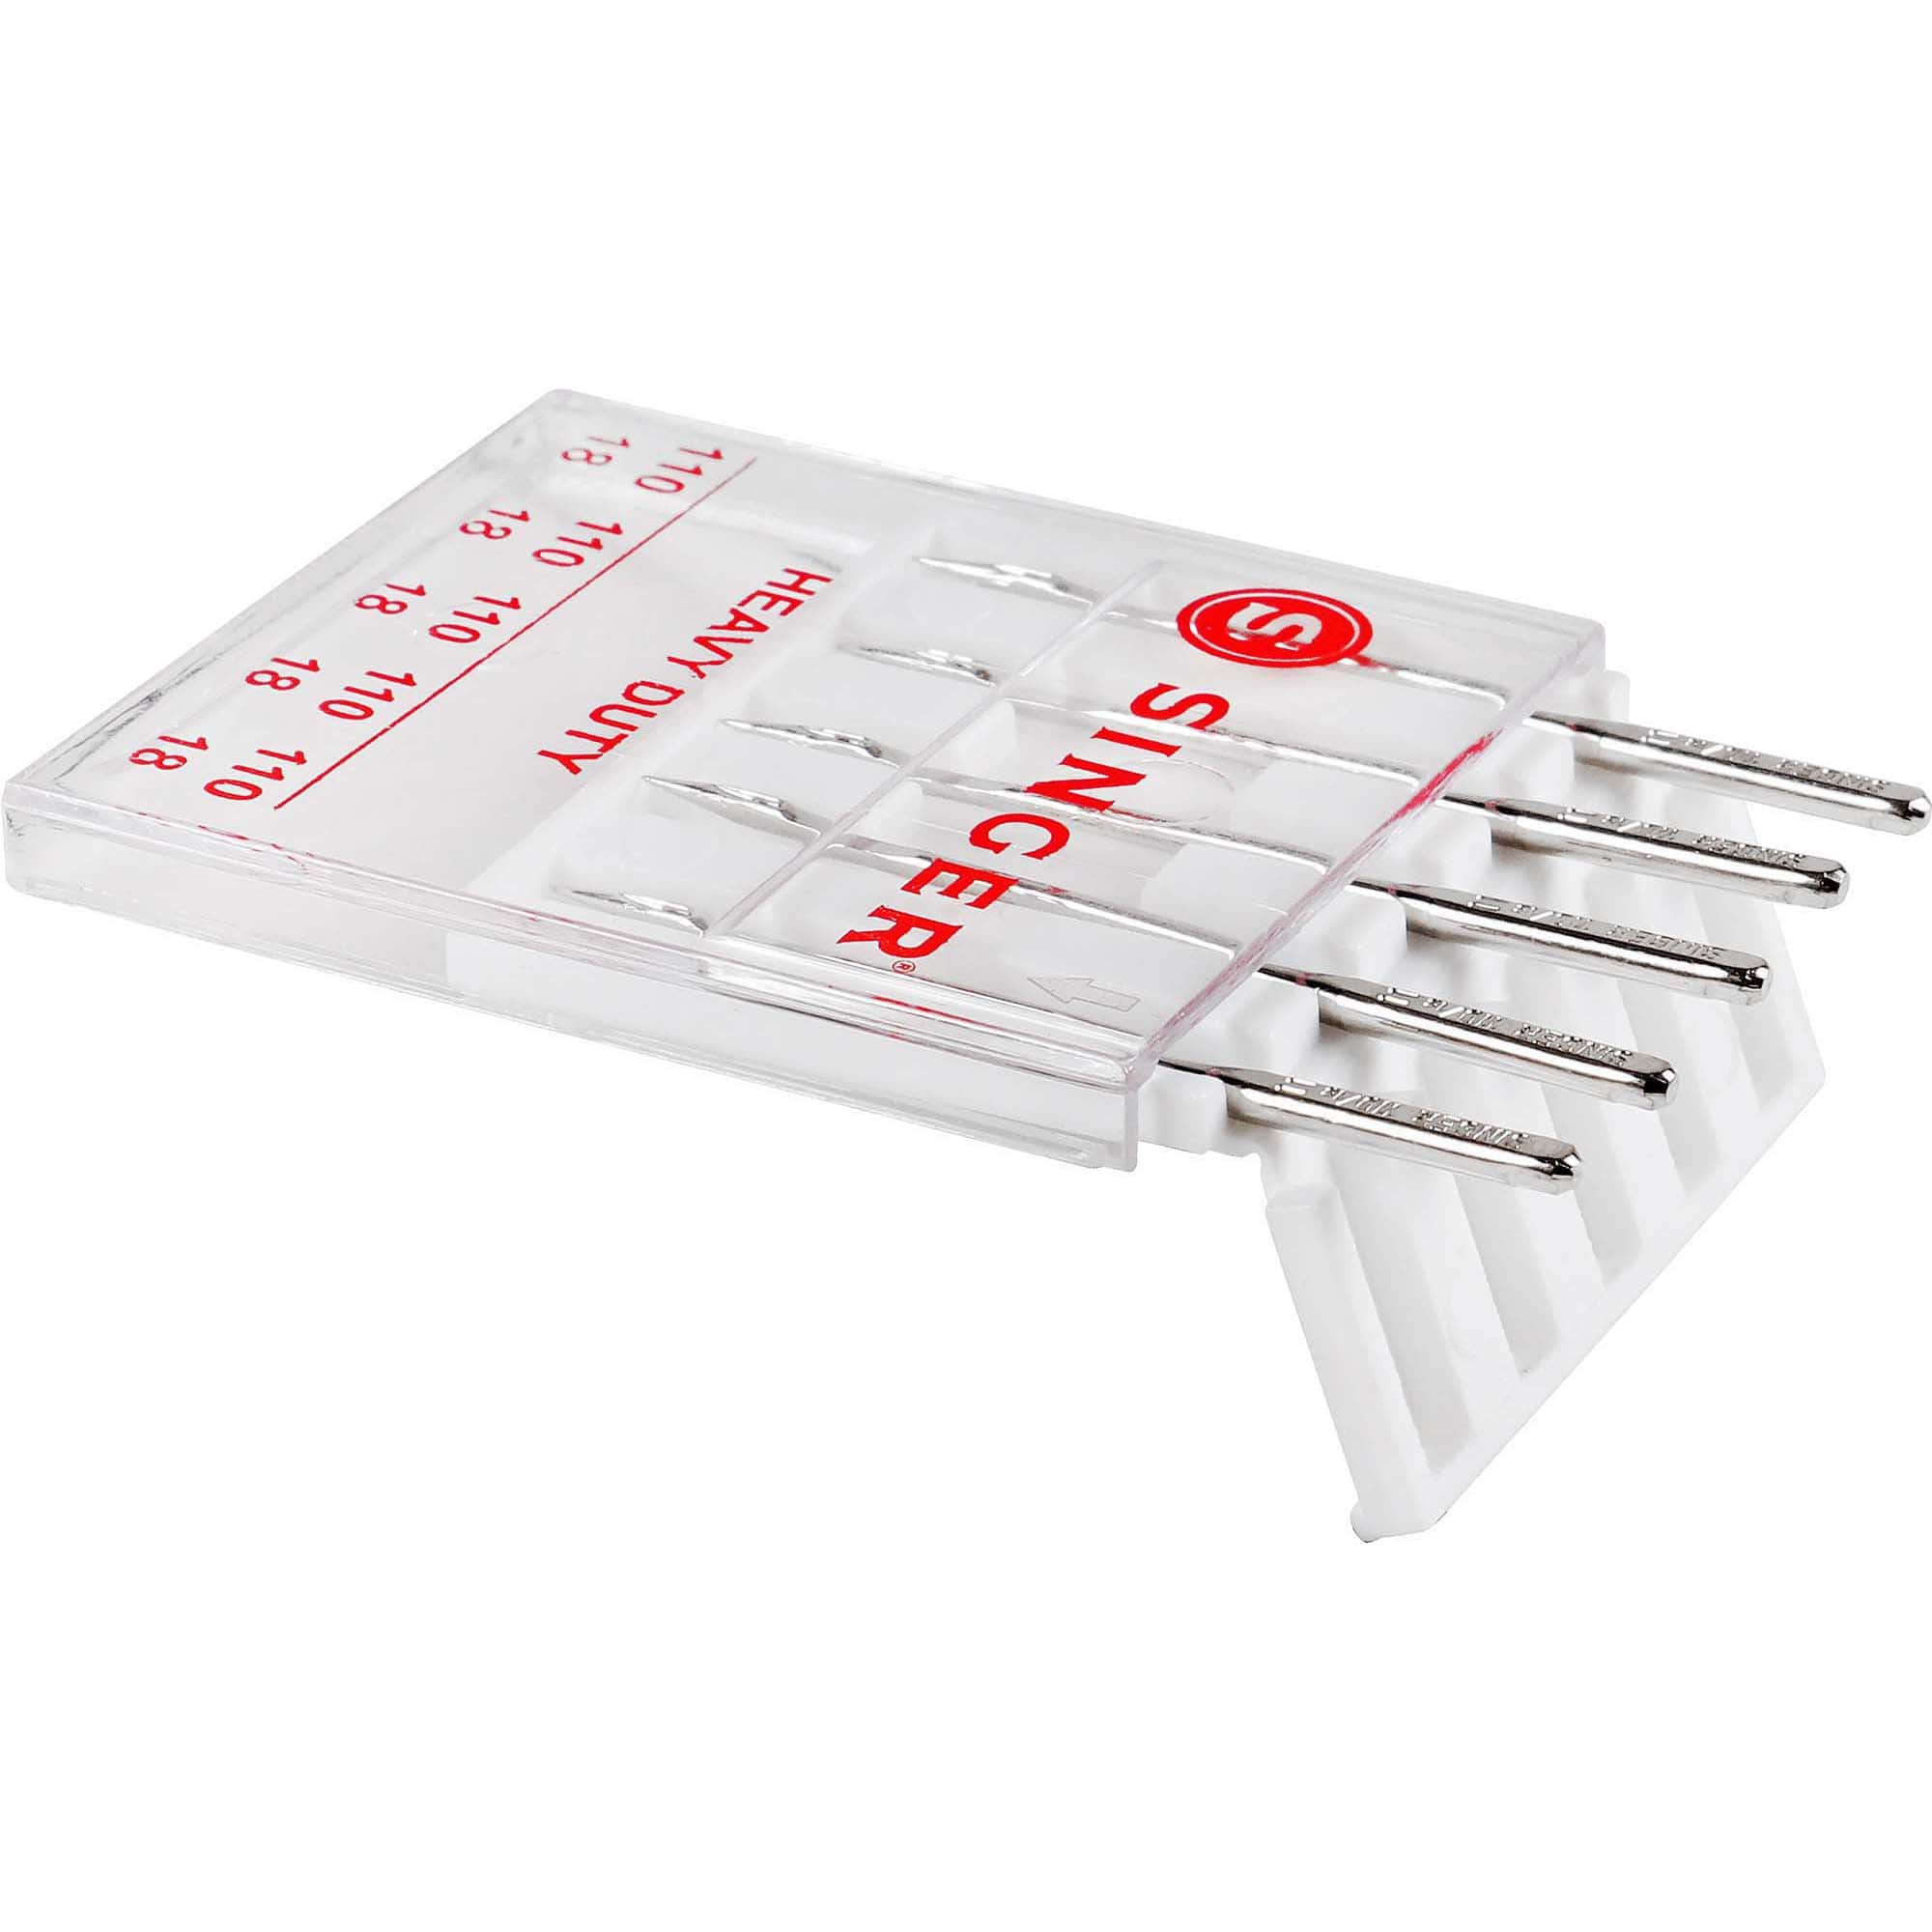 Shop Heavy Duty Sewing Needles Singer with great discounts and